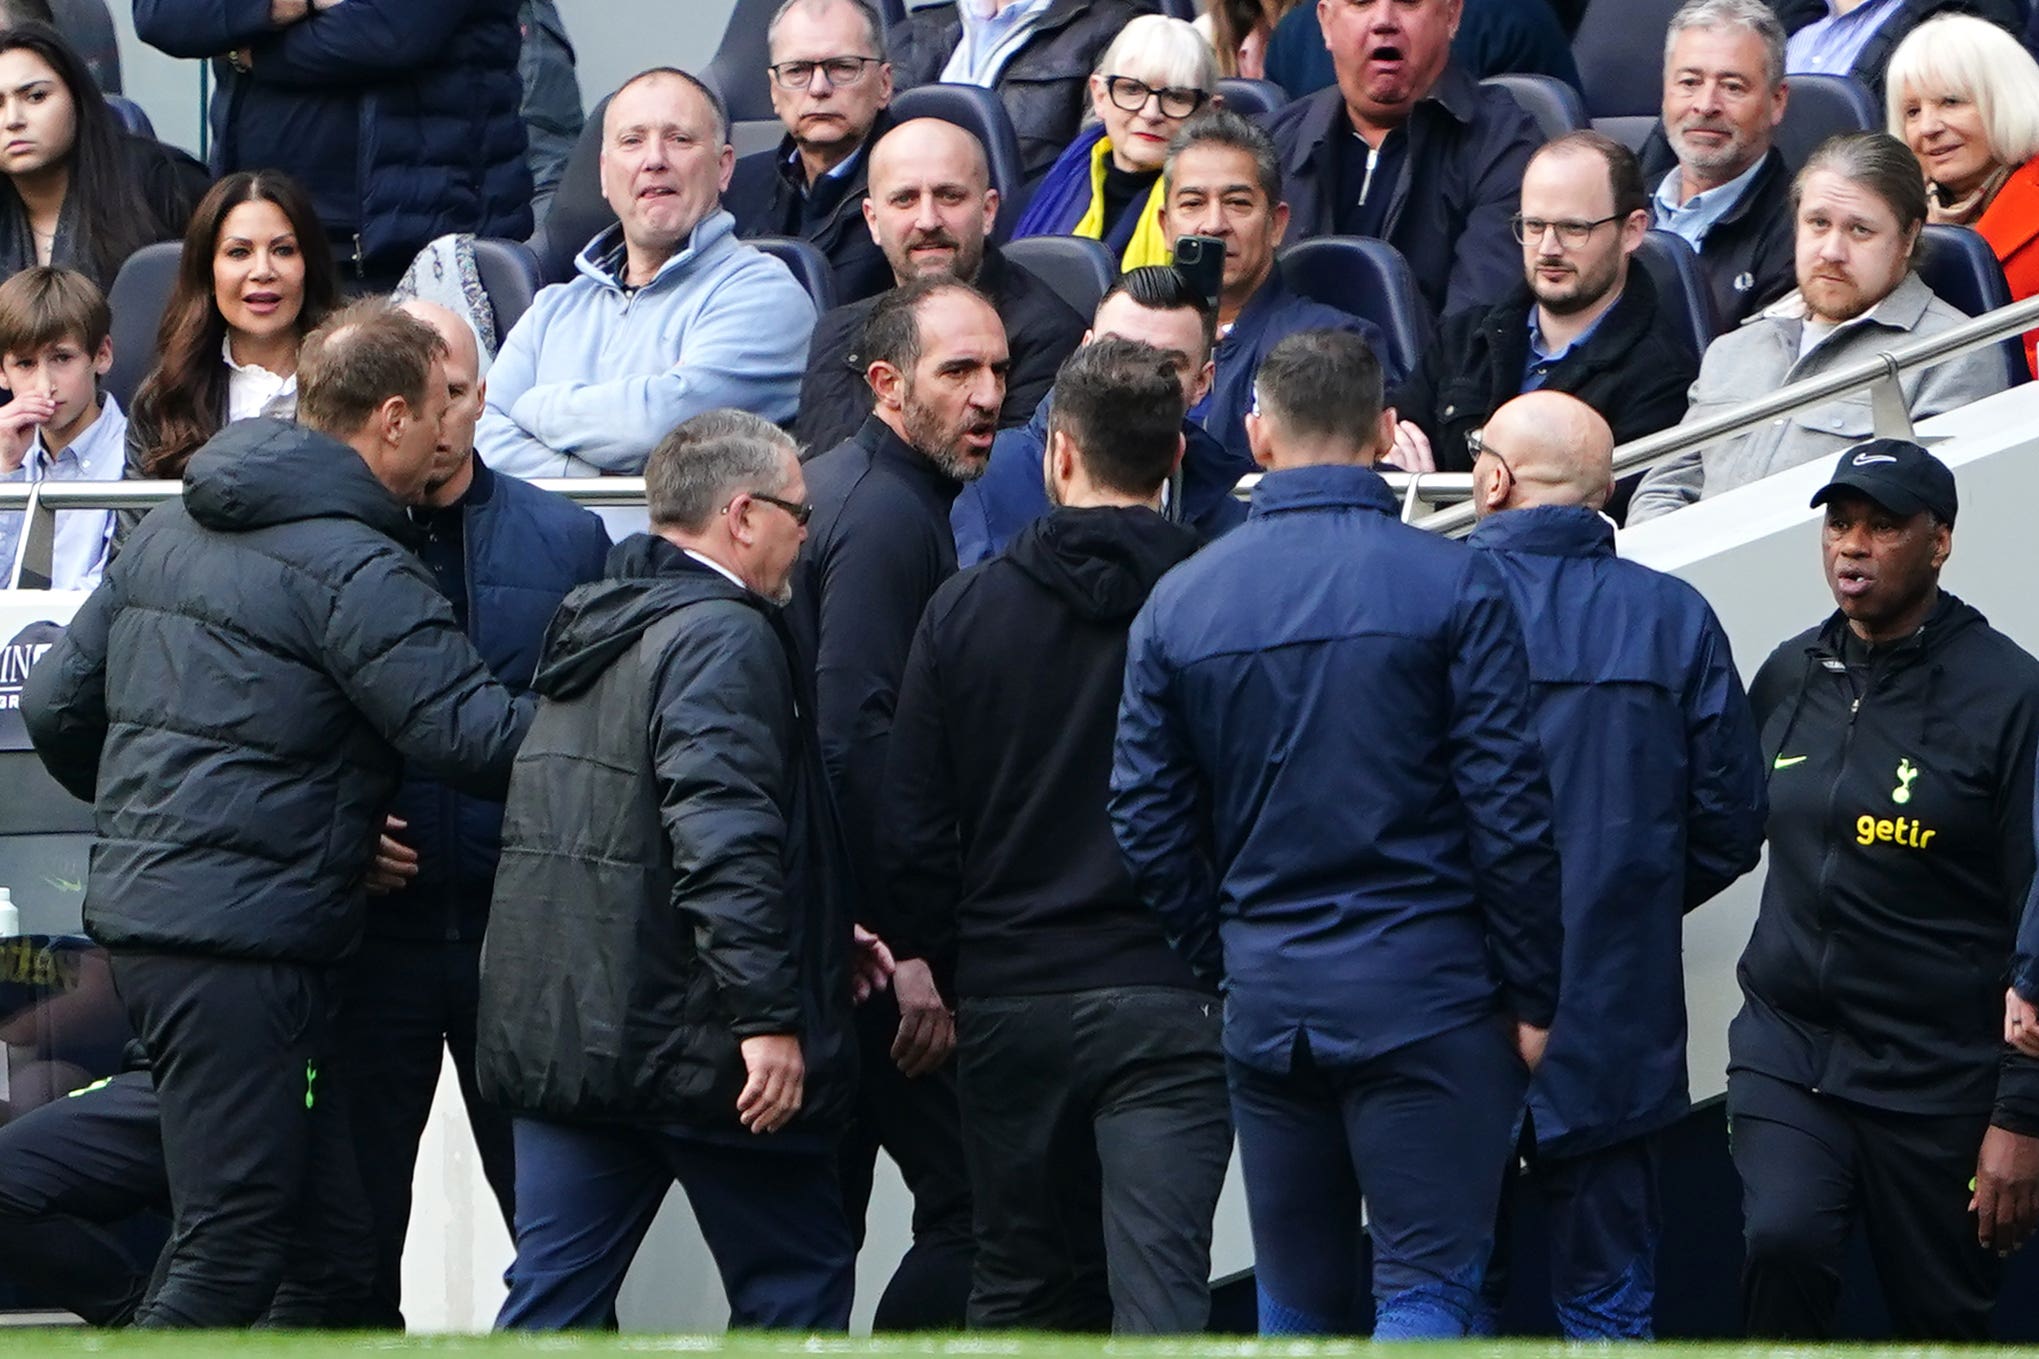 Roberto De Zerbi and Cristian Stellini were sent off in the second half of Brighton’s ill-tempered 2-1 Premier League loss at Spurs last weekend (Zac Goodwin/PA)